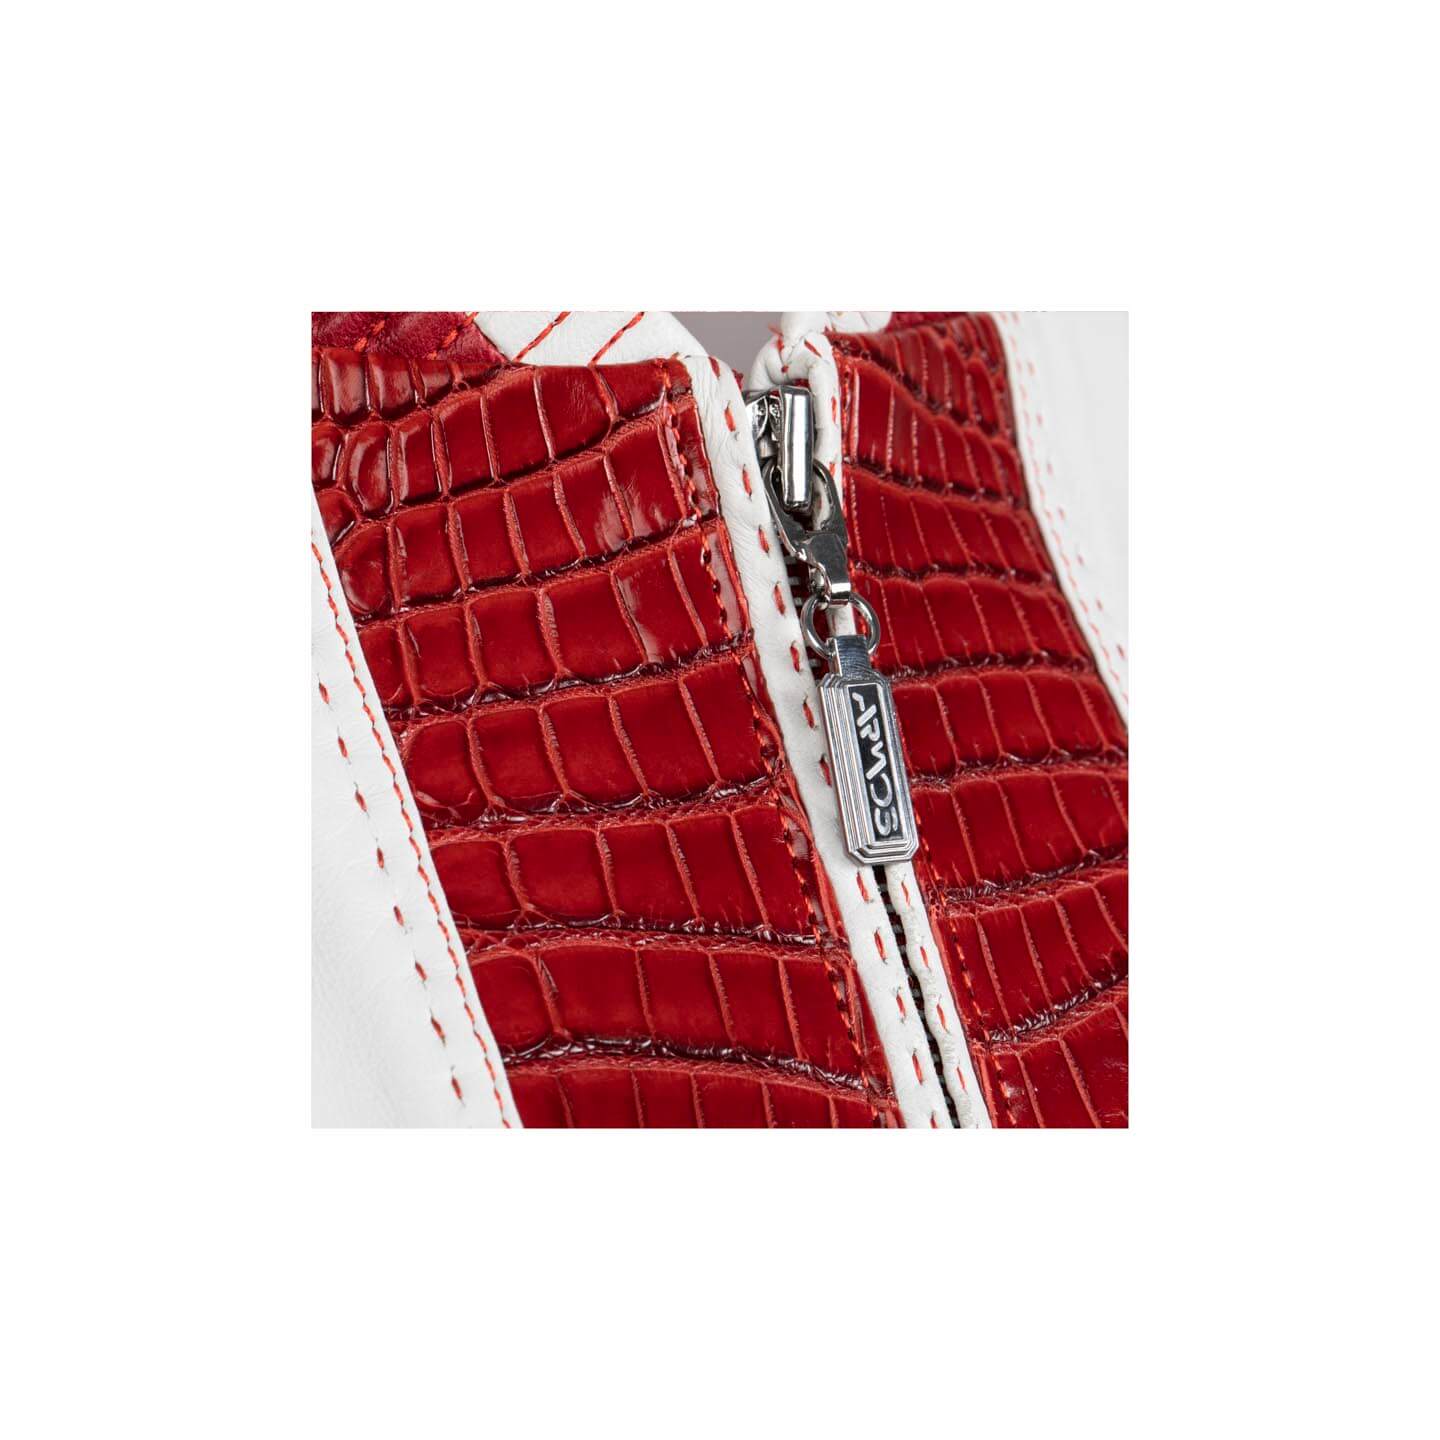 Red and white jacket